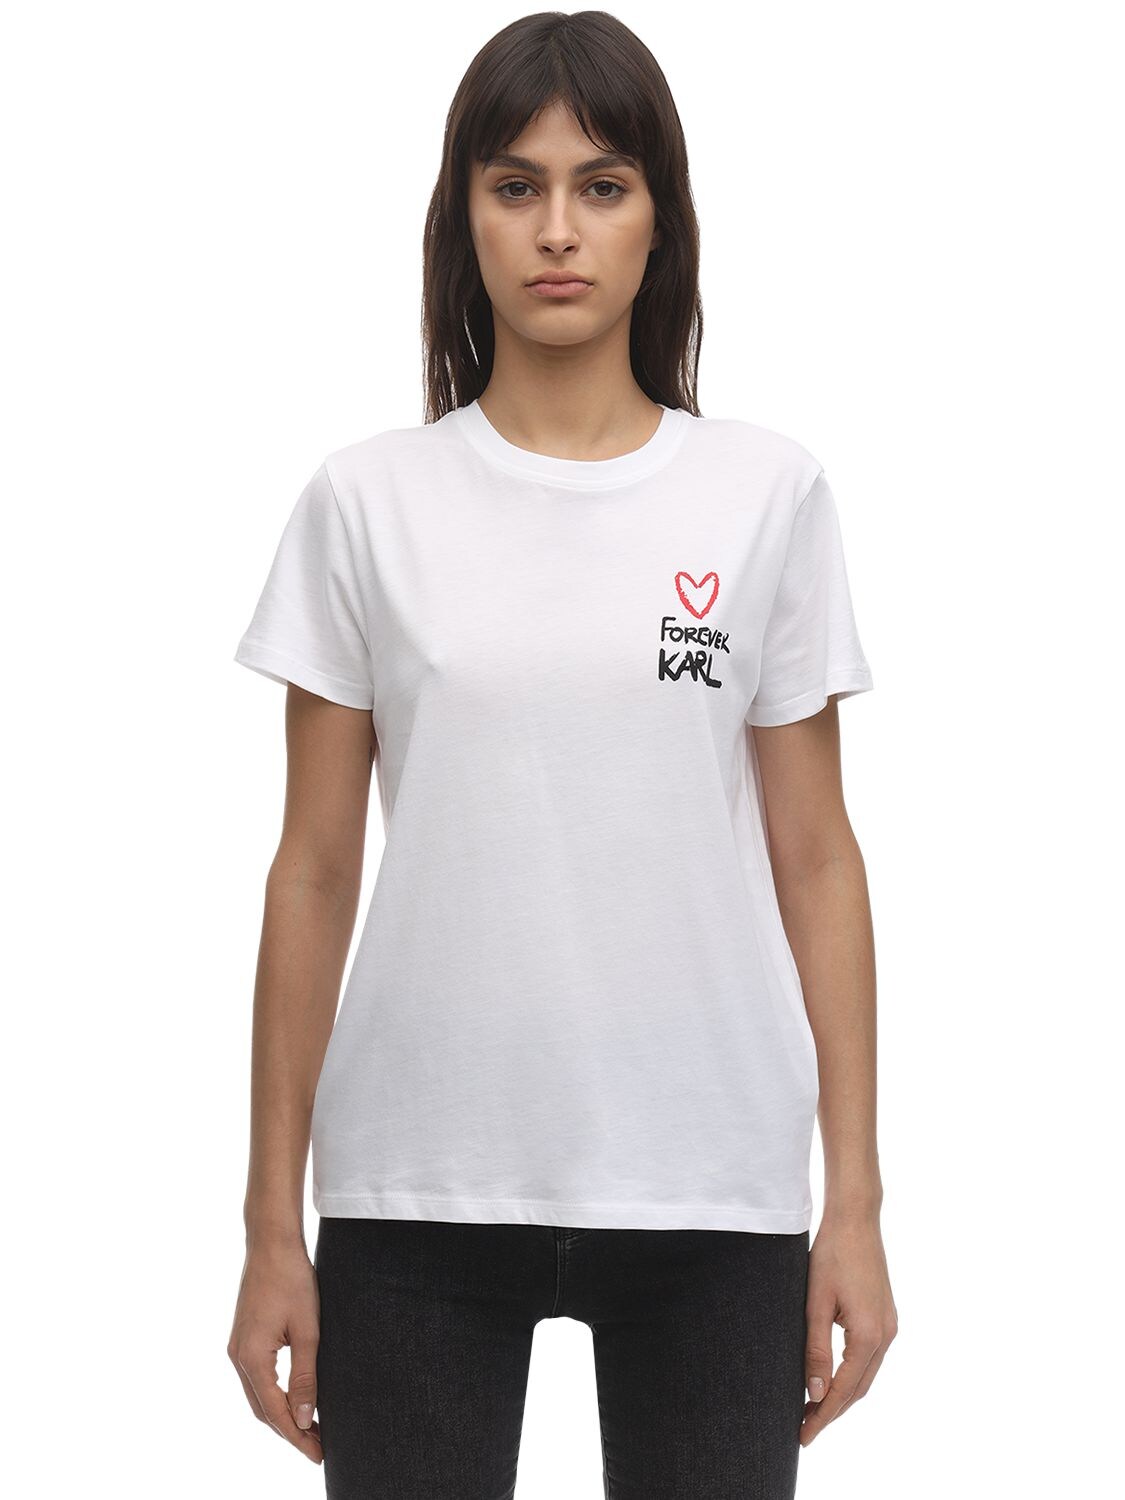 KARL LAGERFELD FOREVER KARL COTTON JERSEY T-SHIRT,71IXP4004-MTAW0